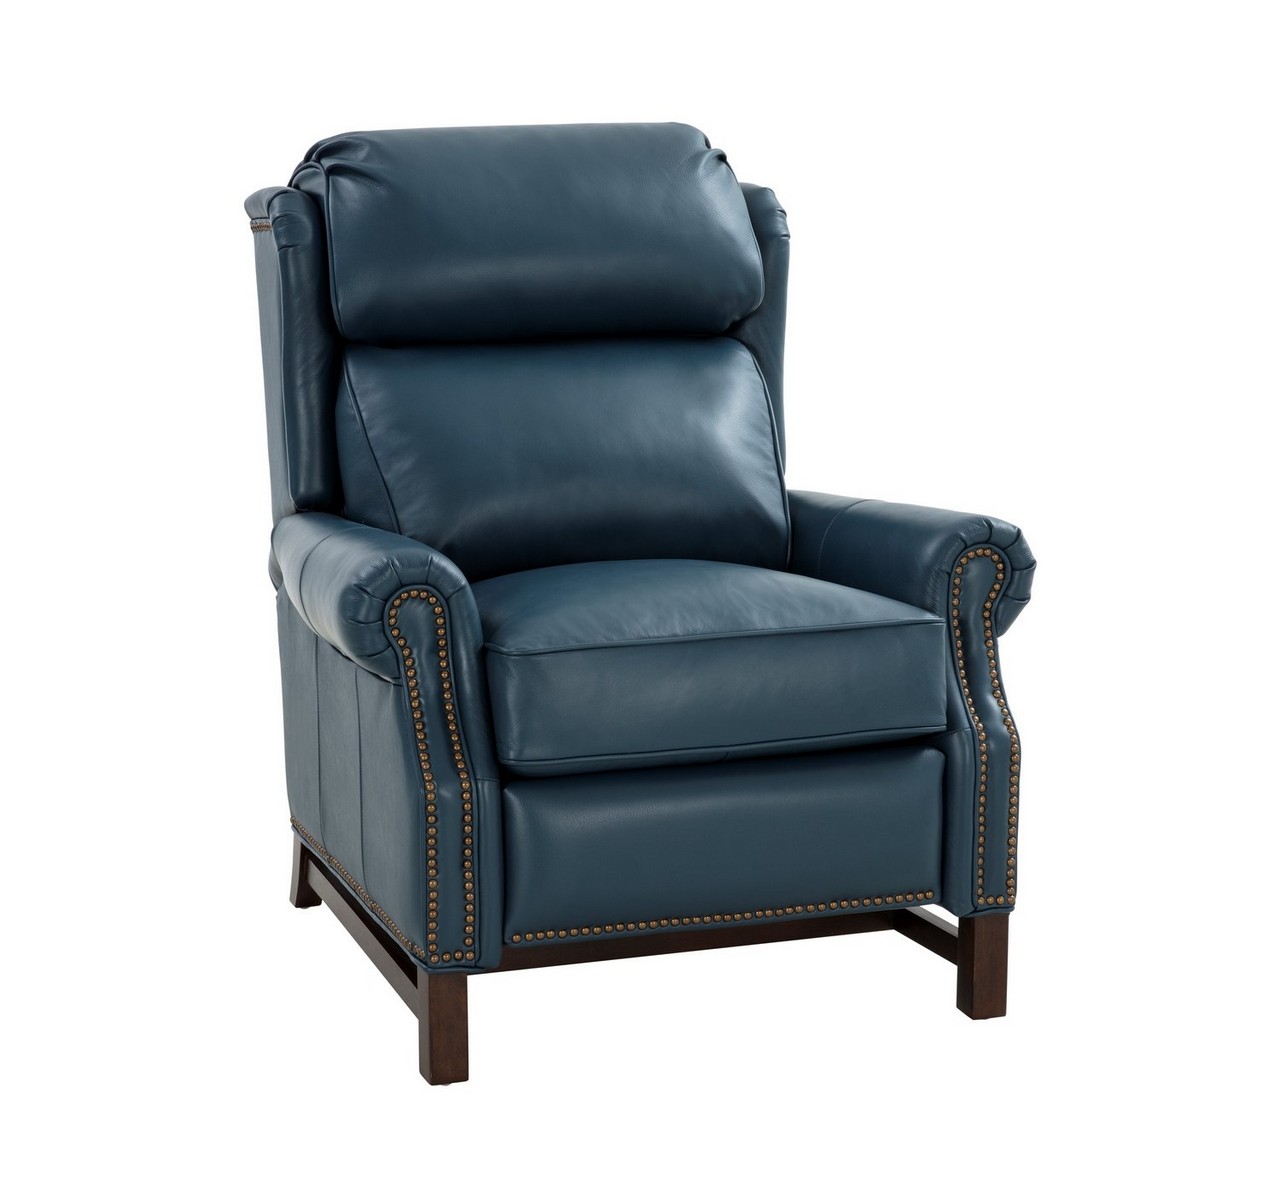 Barcalounger Thornfield Recliner Chair - Prestin Yale Blue/All Leather